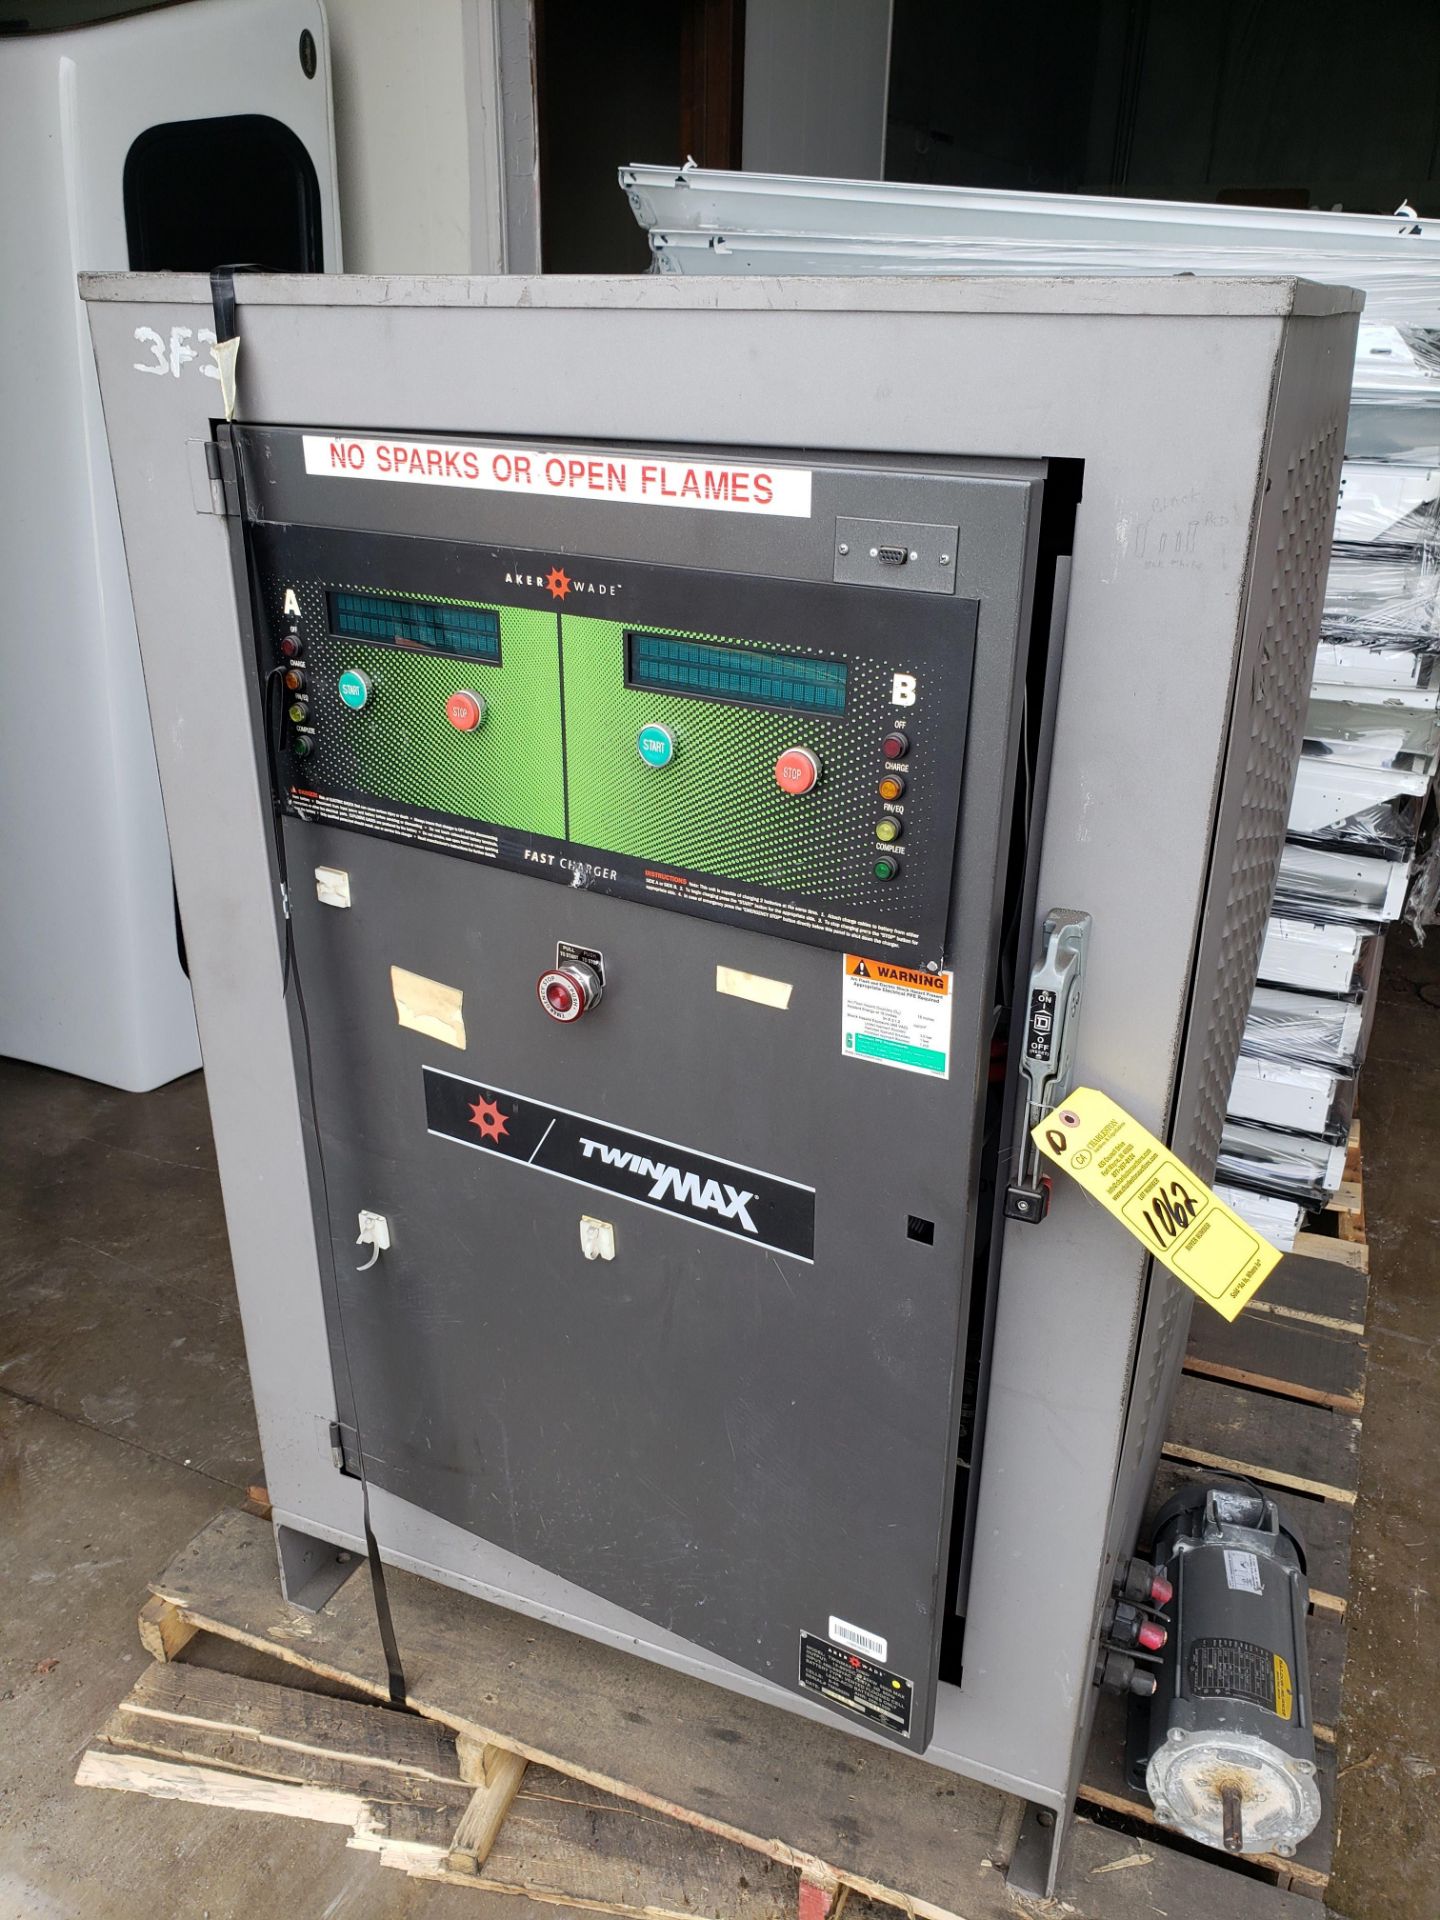 2005 AKER WADE TWIN MAX 5002 FAST CHARGER OUTPUT 12-80VDC@25KW 60 HZ CELLS-6-40 S#TM5002N 10070